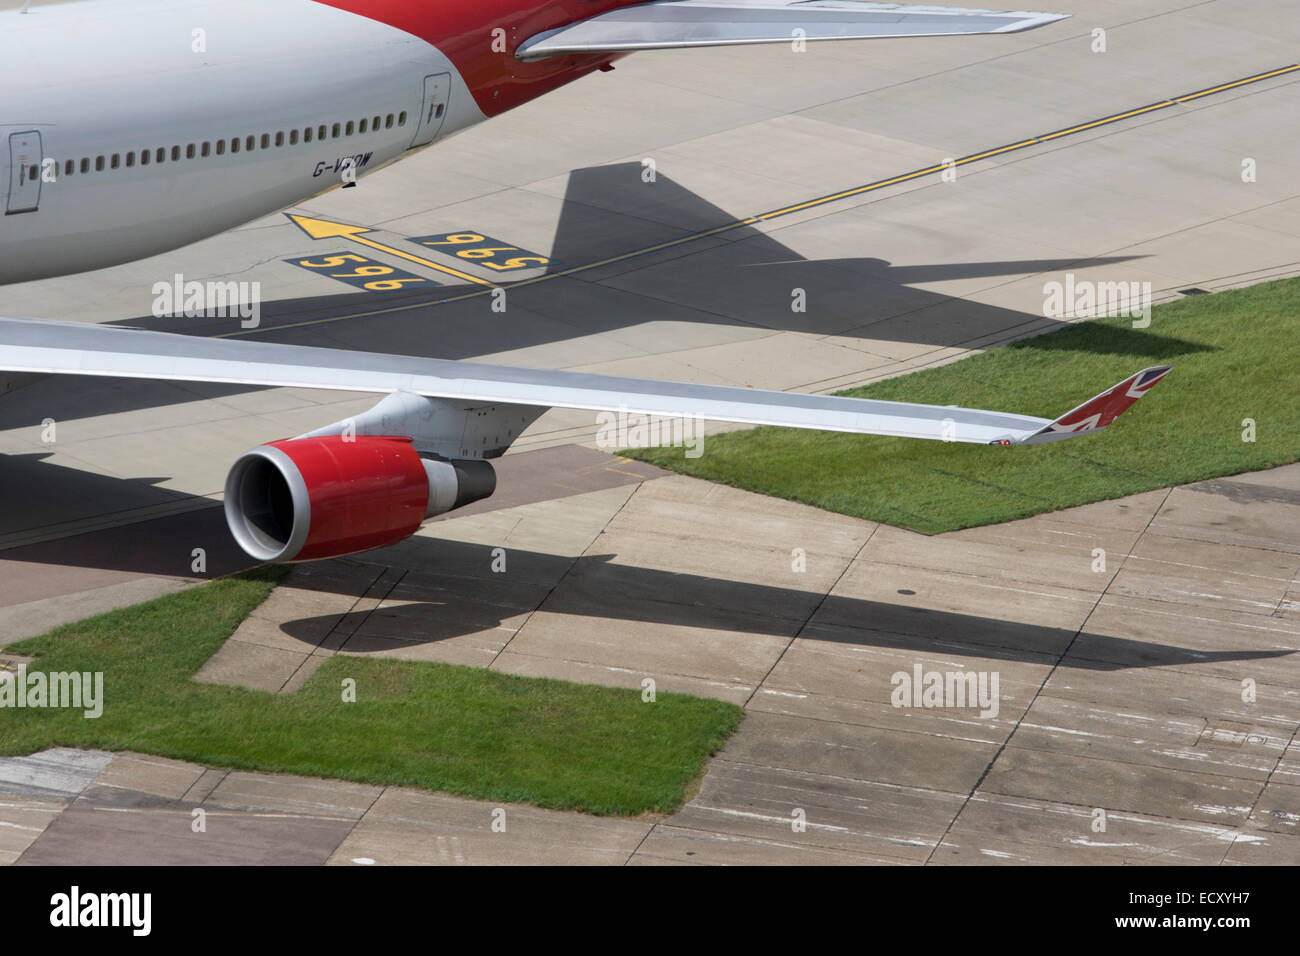 Aerial view (from control tower) of Virgin Atlantic airliner's wing and engine at London Heathrow airport. Stock Photo